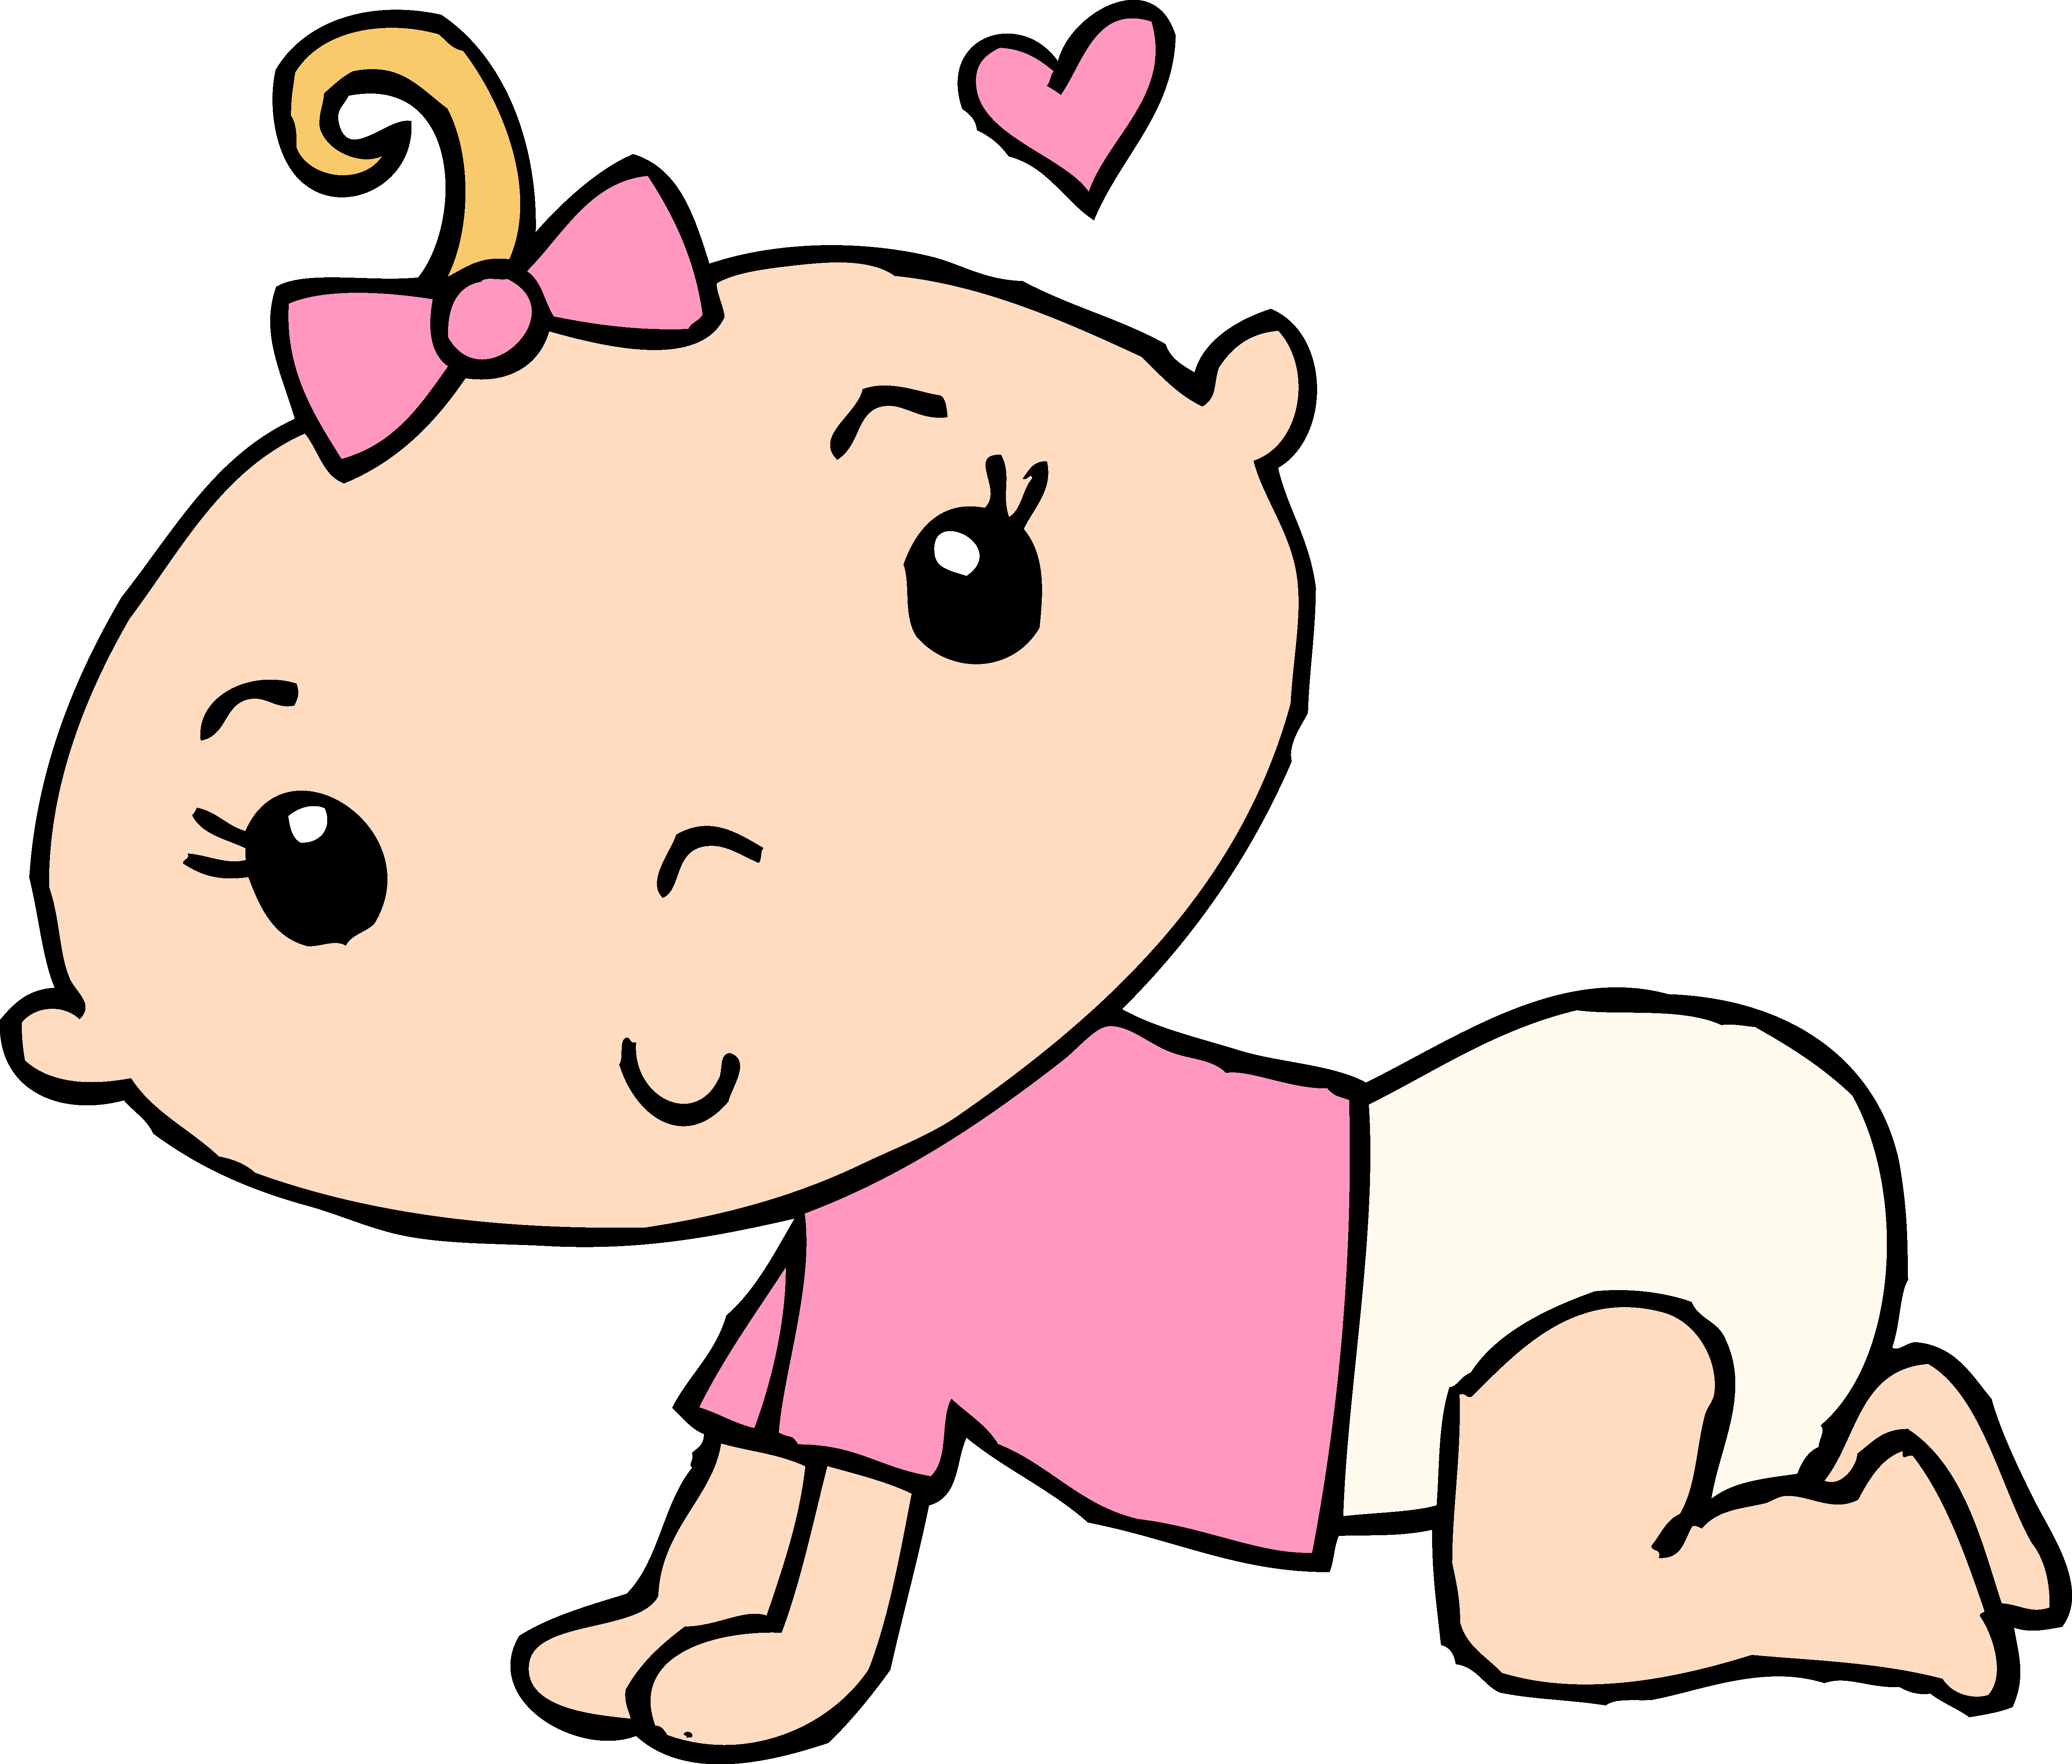 Image of Baby Clipart #10930, Clip Art Baby Face - Clipartoons